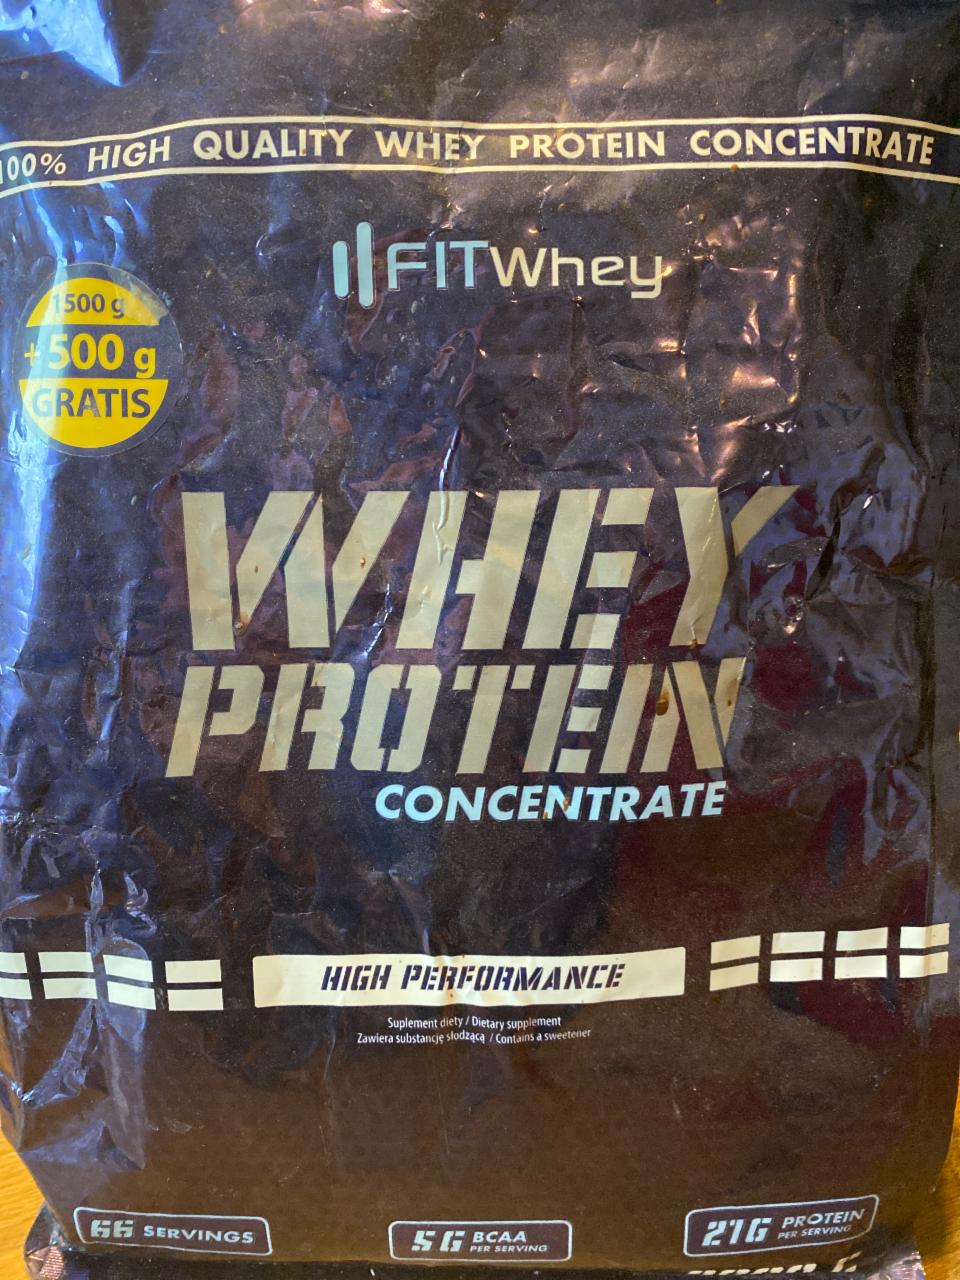 Fotografie - Whey Protein Concentrate FitWhey